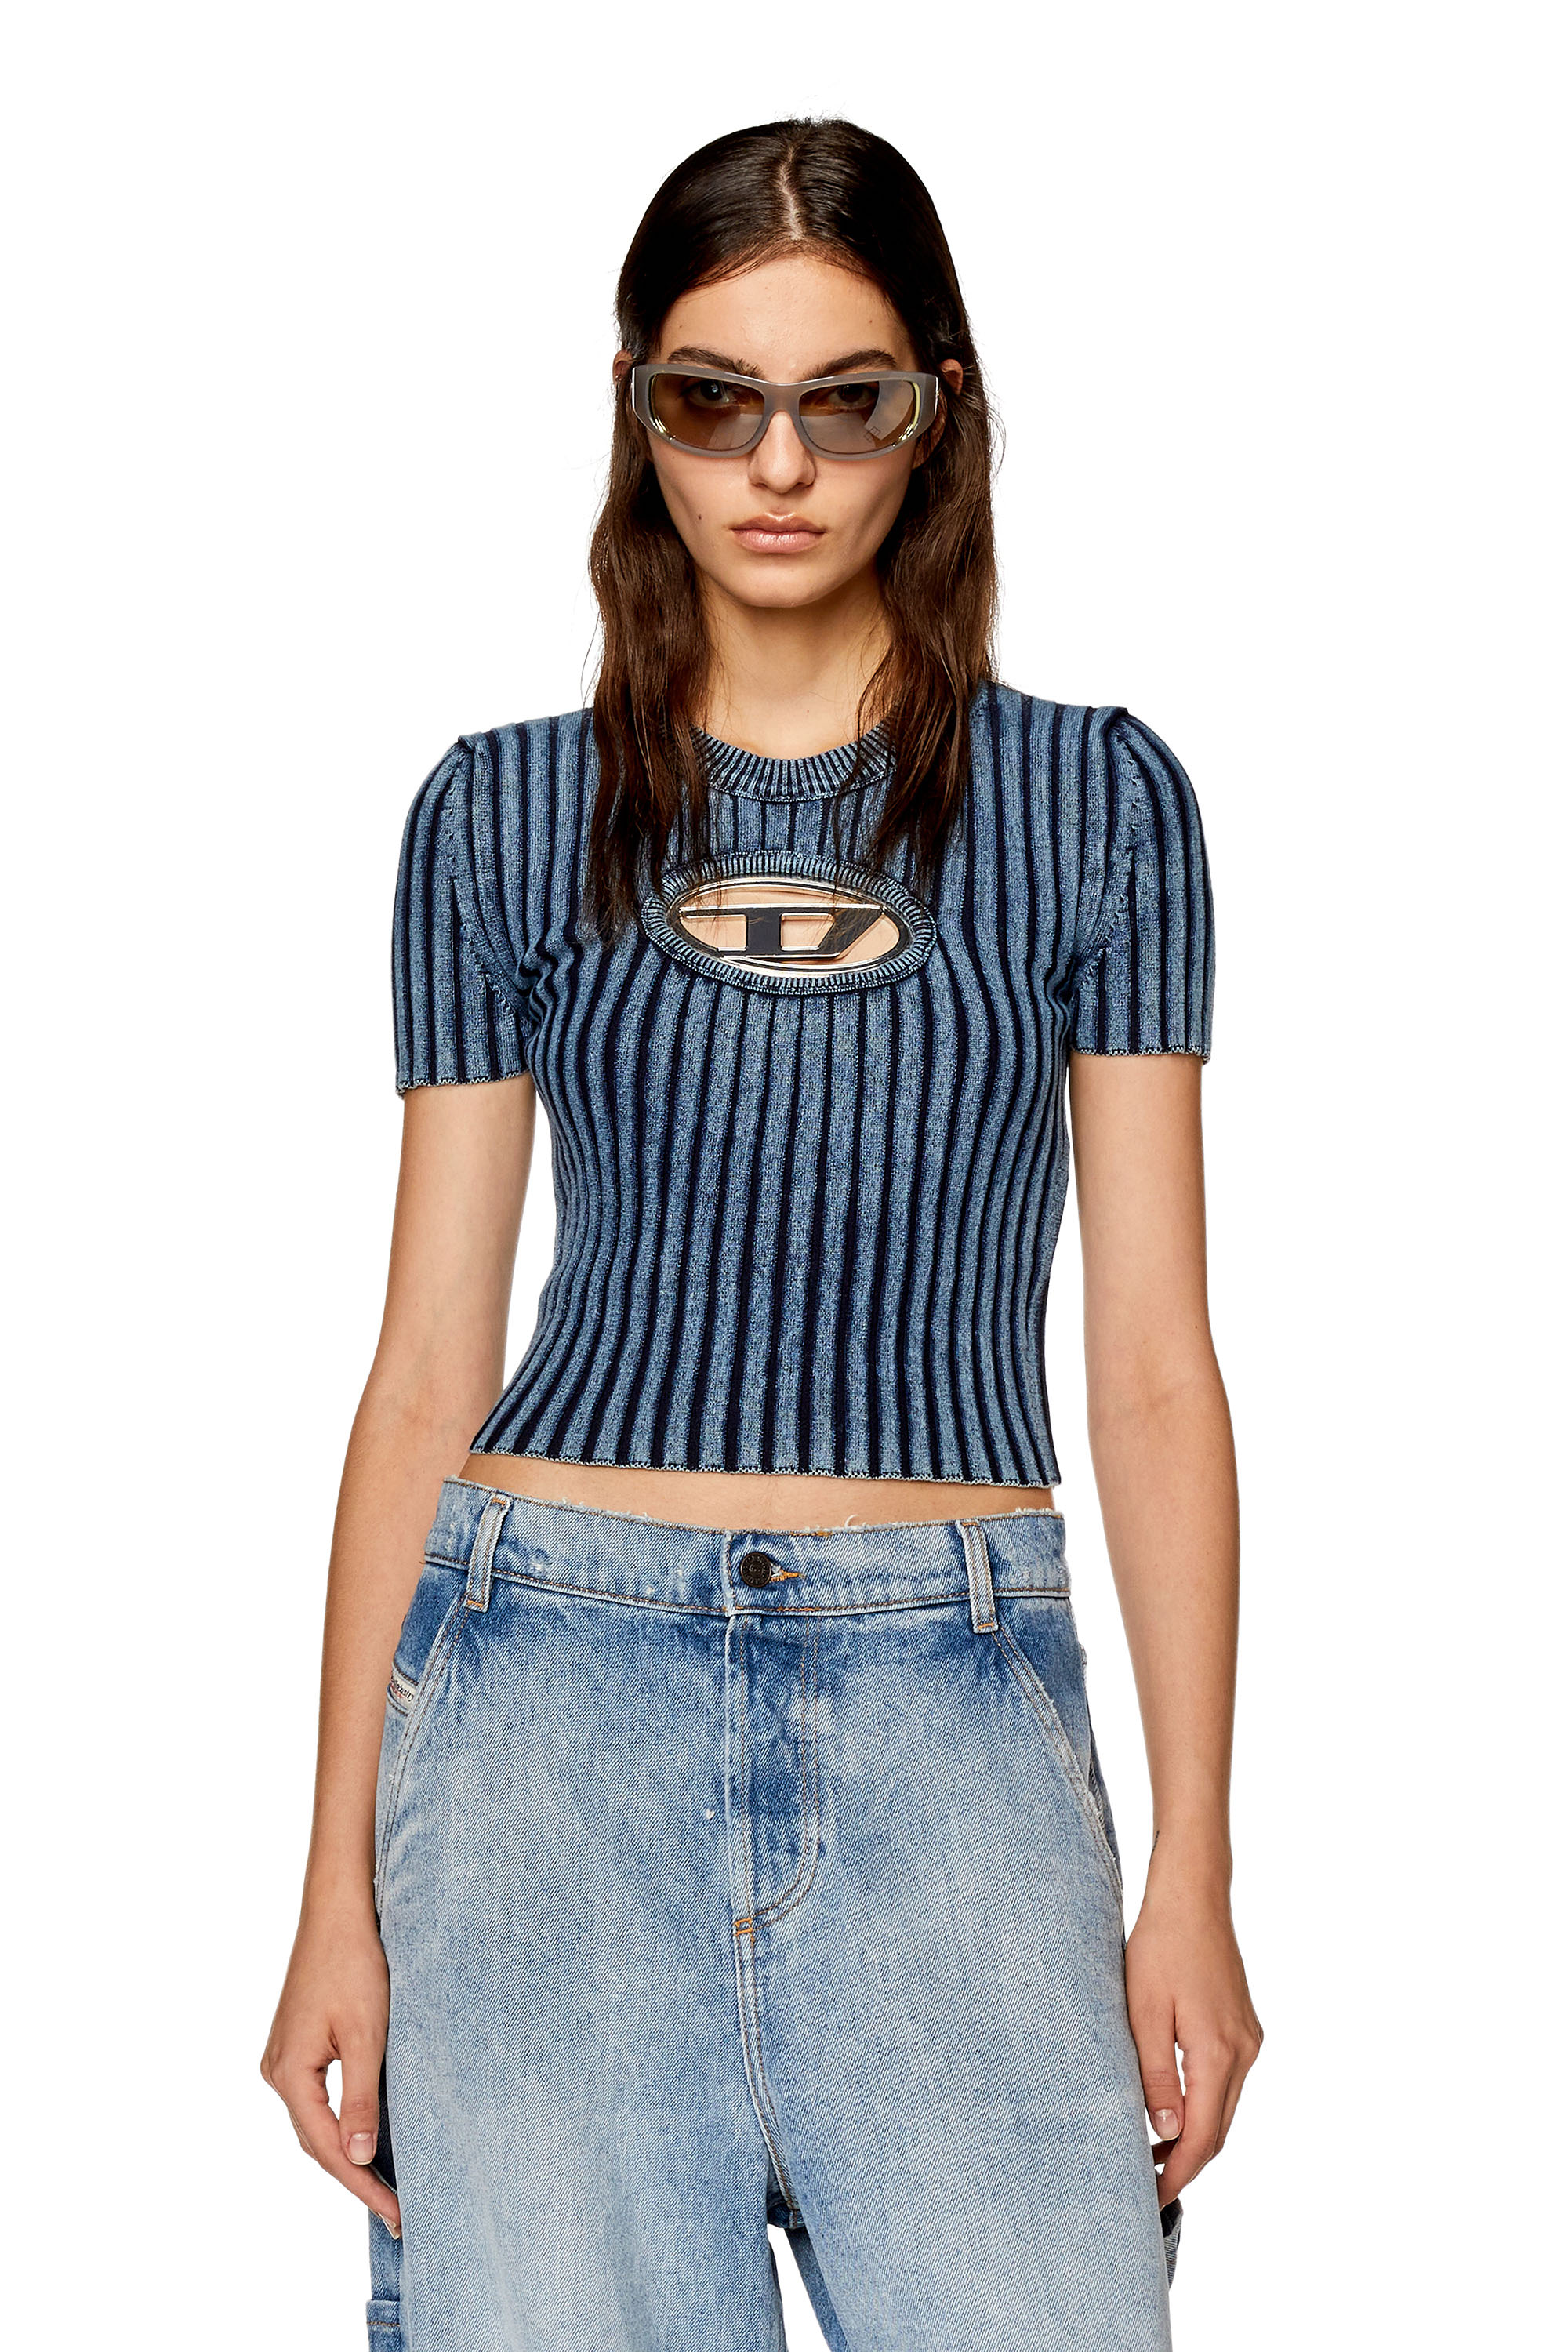 Diesel Top With D Plaque In Blue